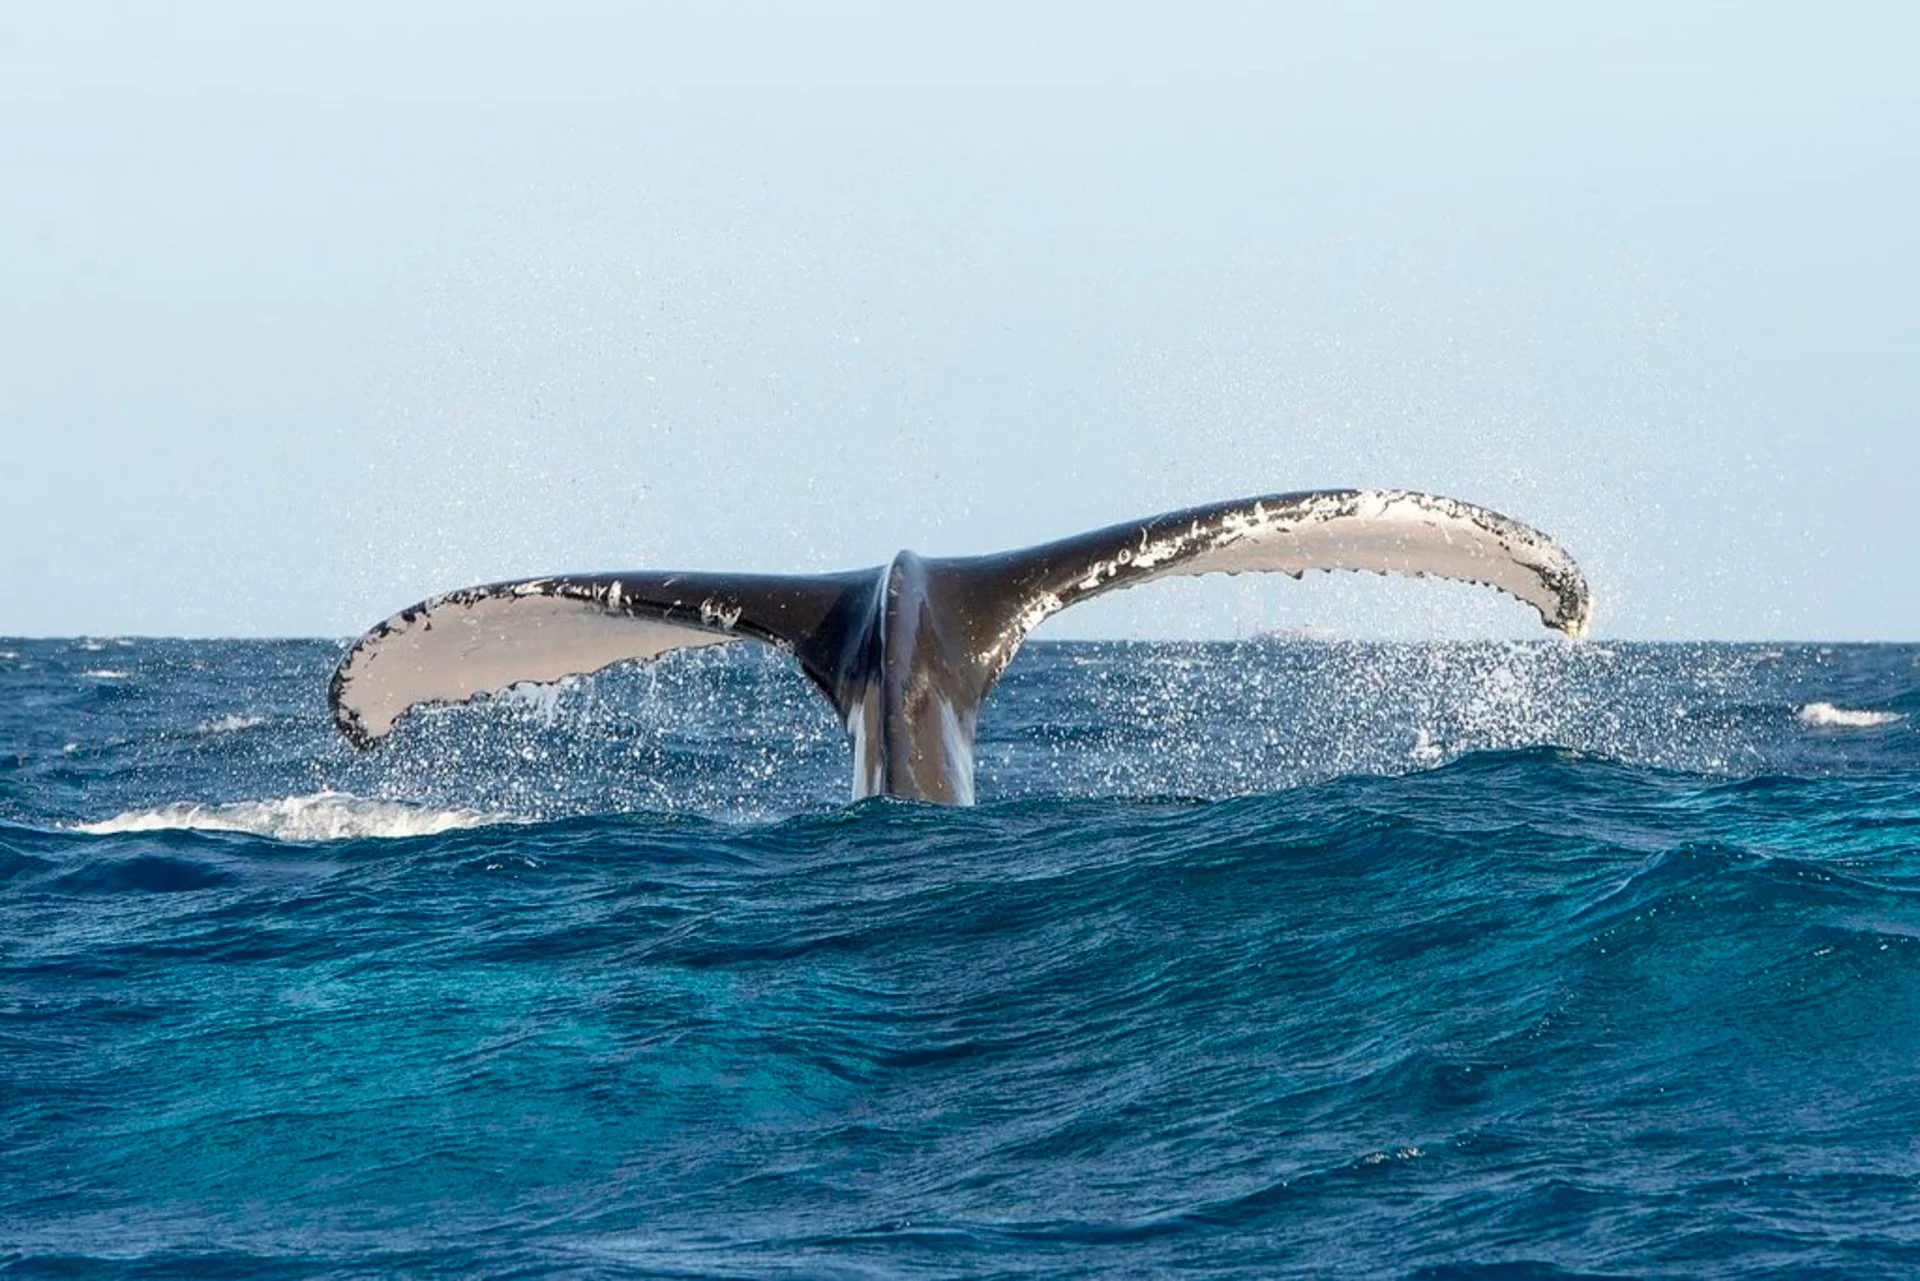 Whale watching in Bayahibe in the Dominican Republic.